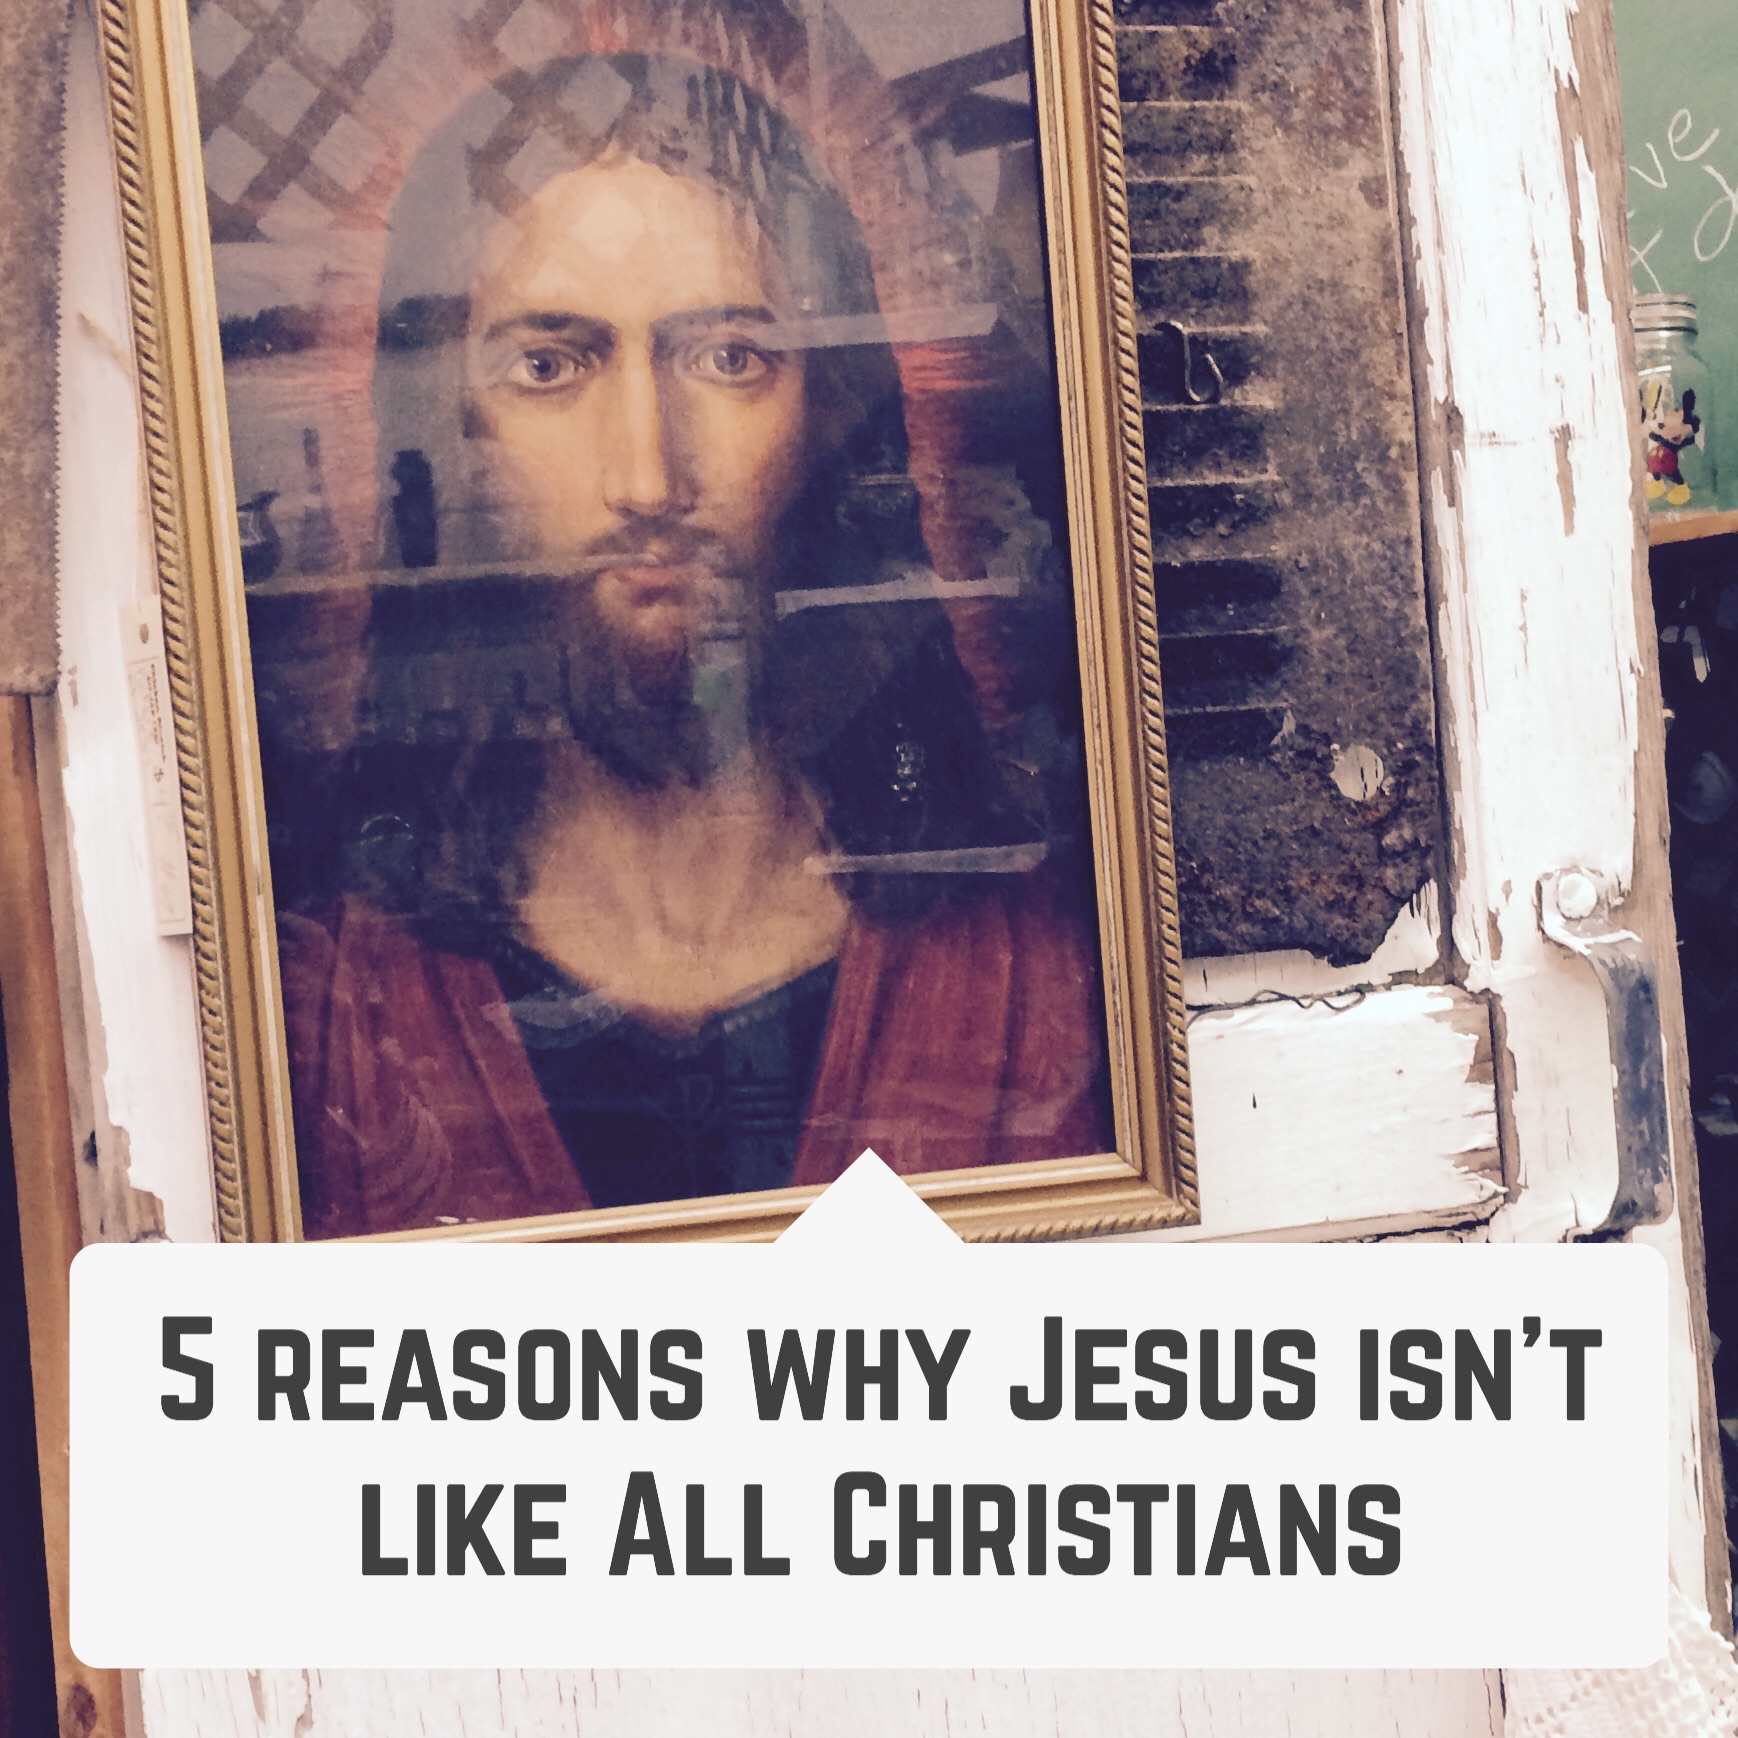 5 REASONS WHY JESUS ISN'T LIKE ALL CHRISTIANS